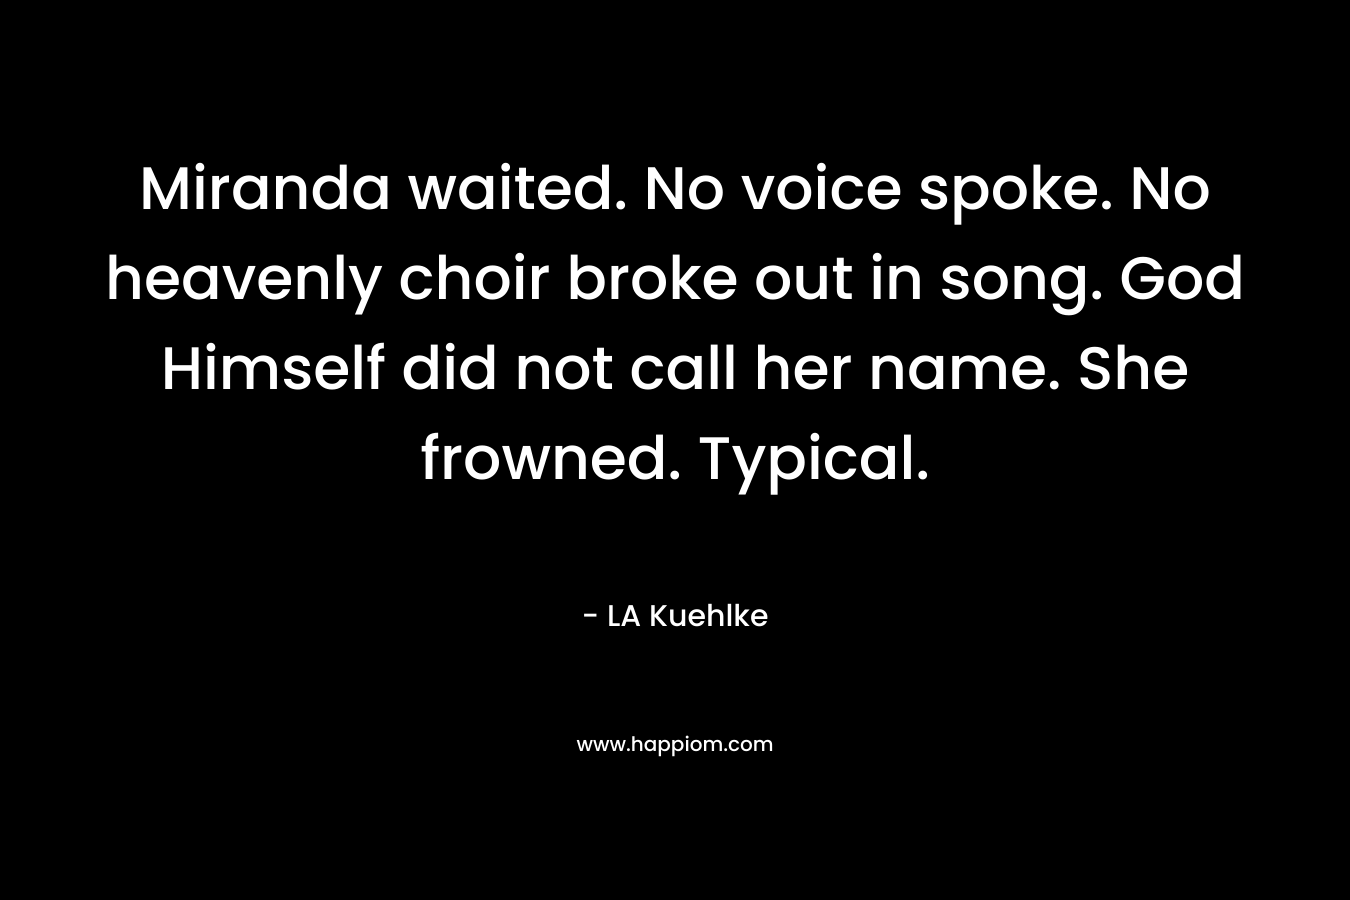 Miranda waited. No voice spoke. No heavenly choir broke out in song. God Himself did not call her name. She frowned. Typical. – LA Kuehlke